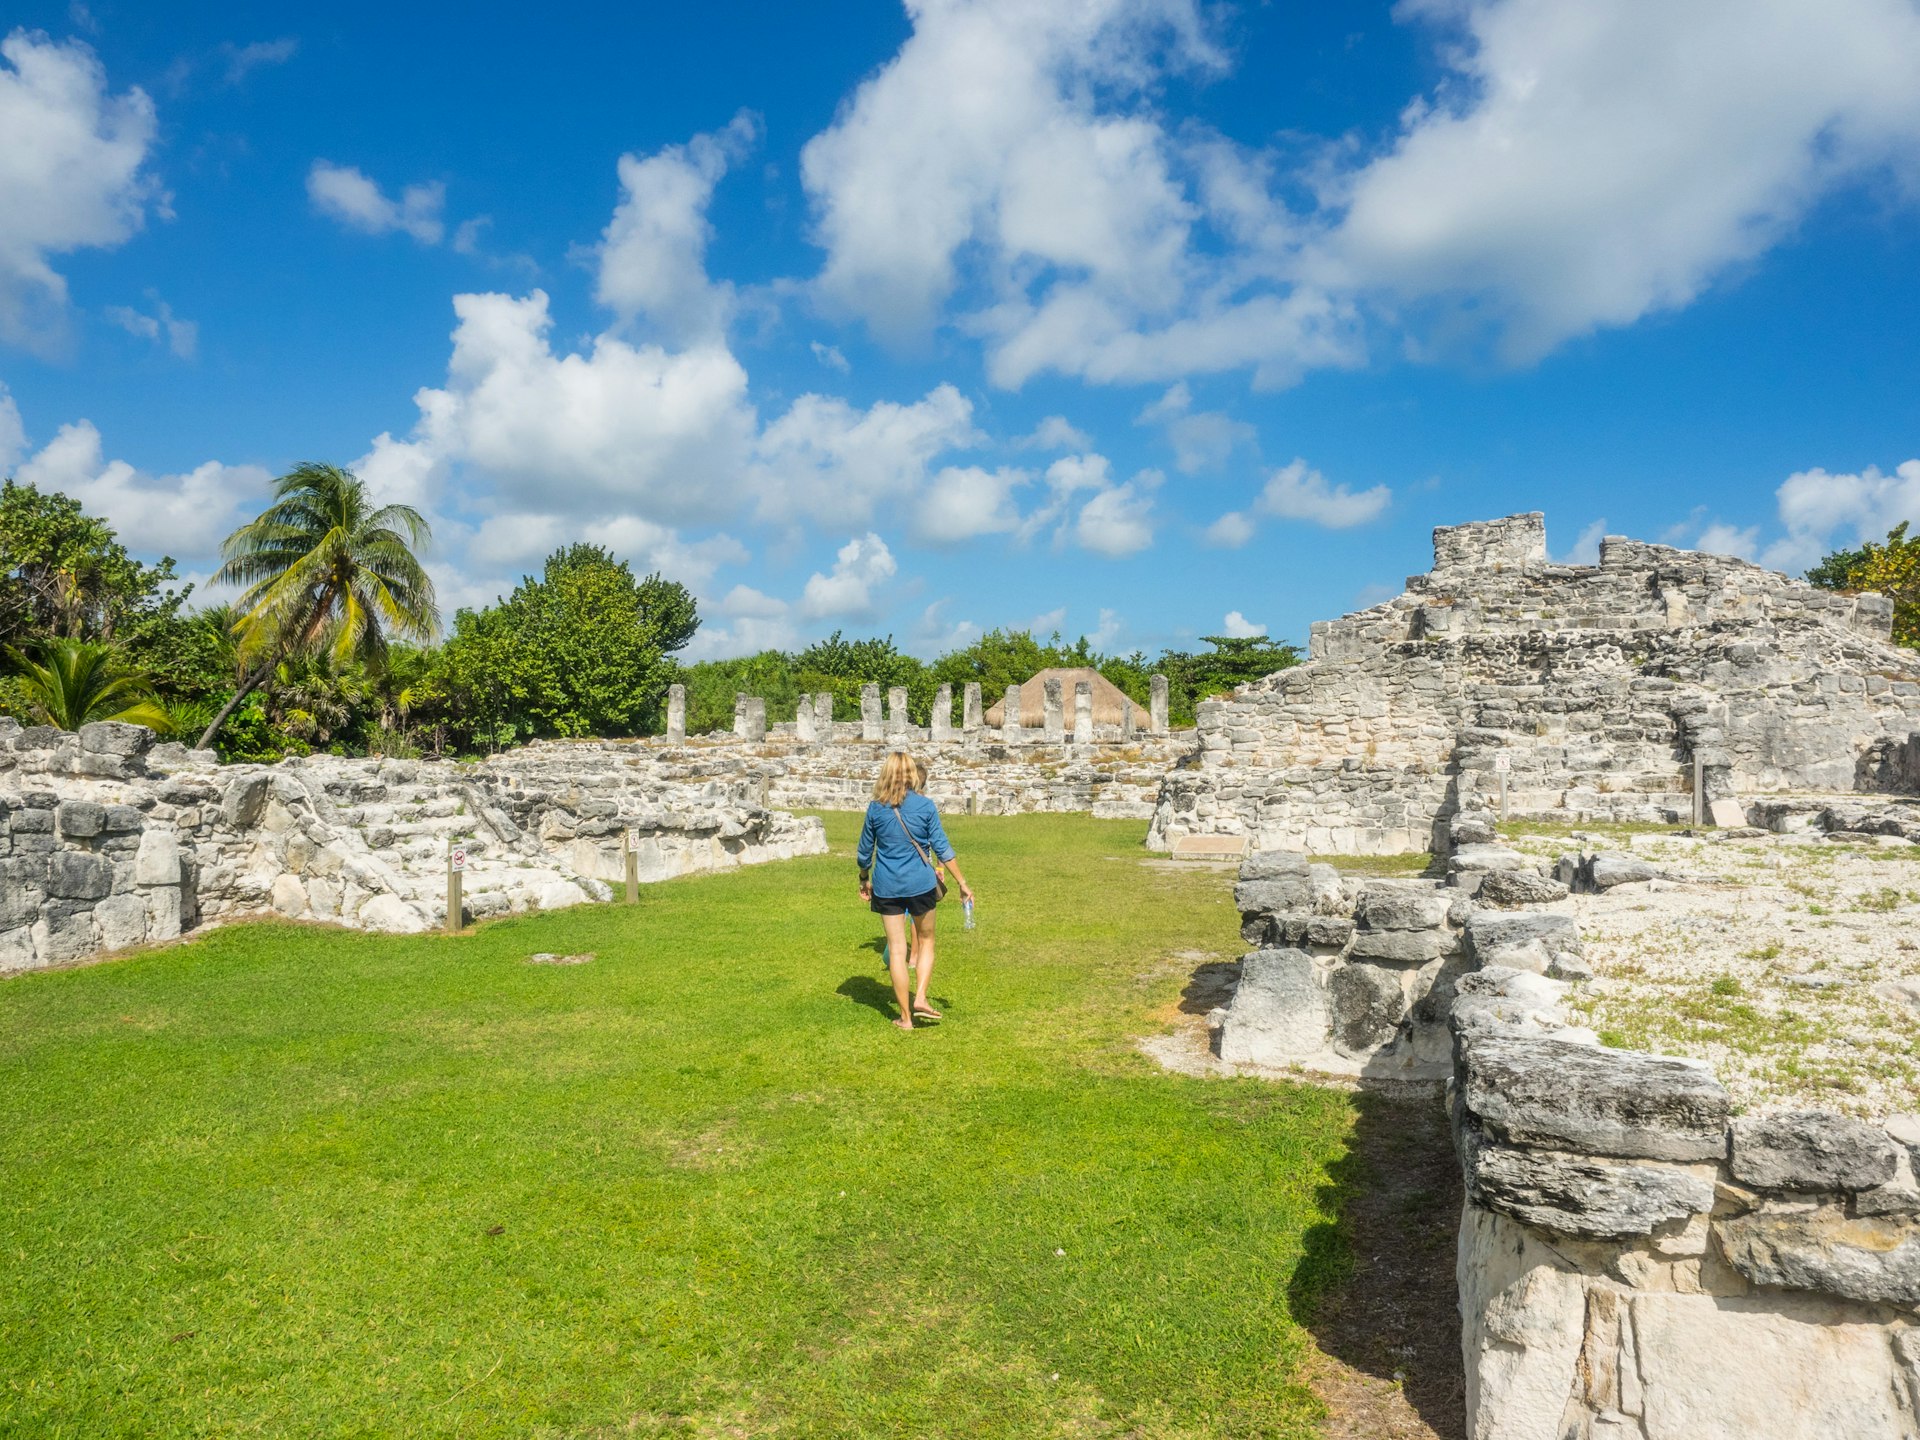 A visitor walks among the ruins of an archaeological site